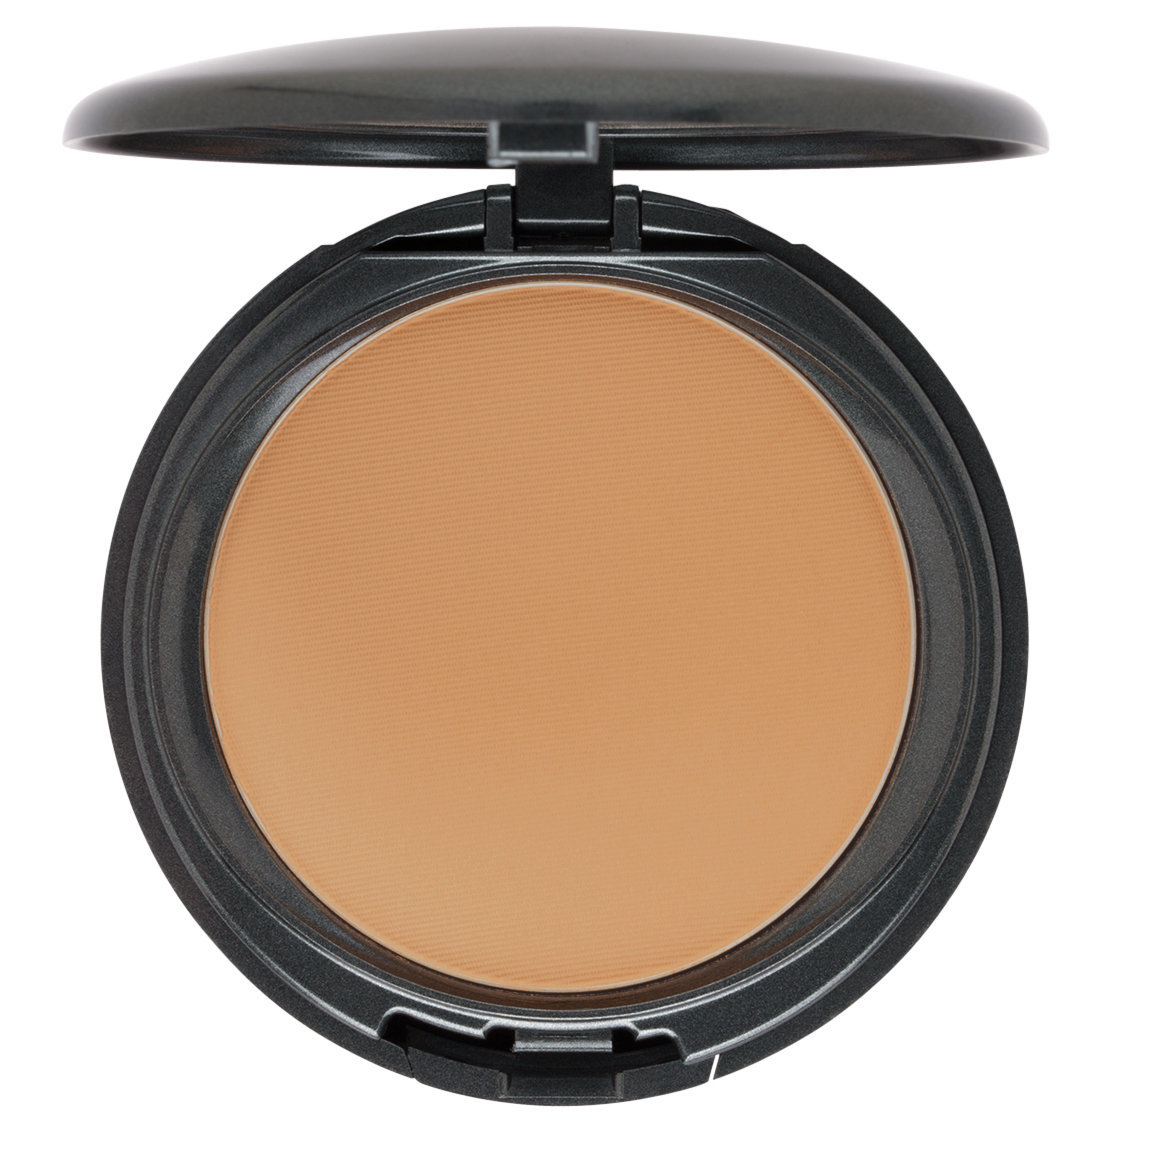 cover fx mineral foundation review